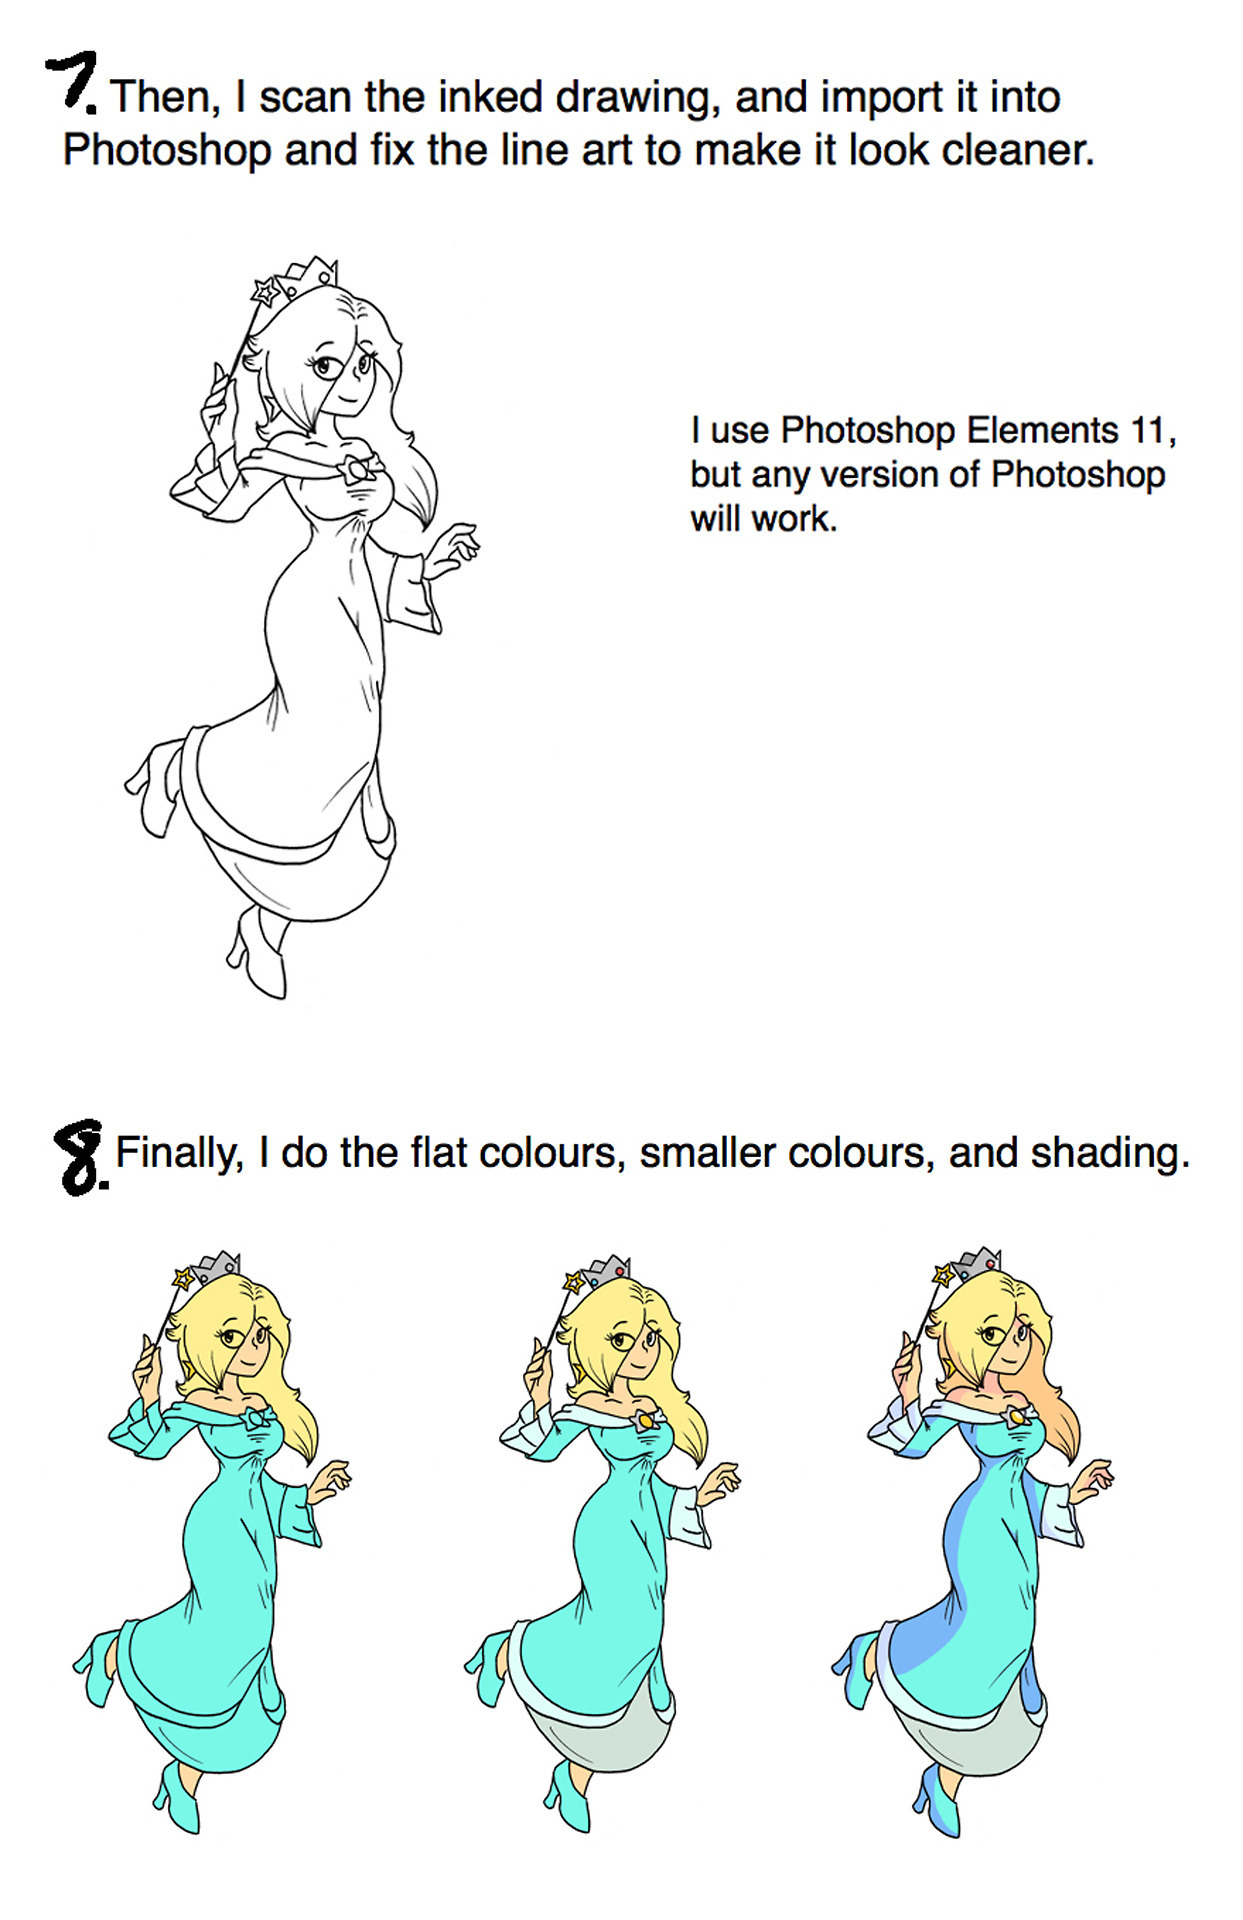 Here&rsquo;s a little tutorial I put together to explain my drawing process.